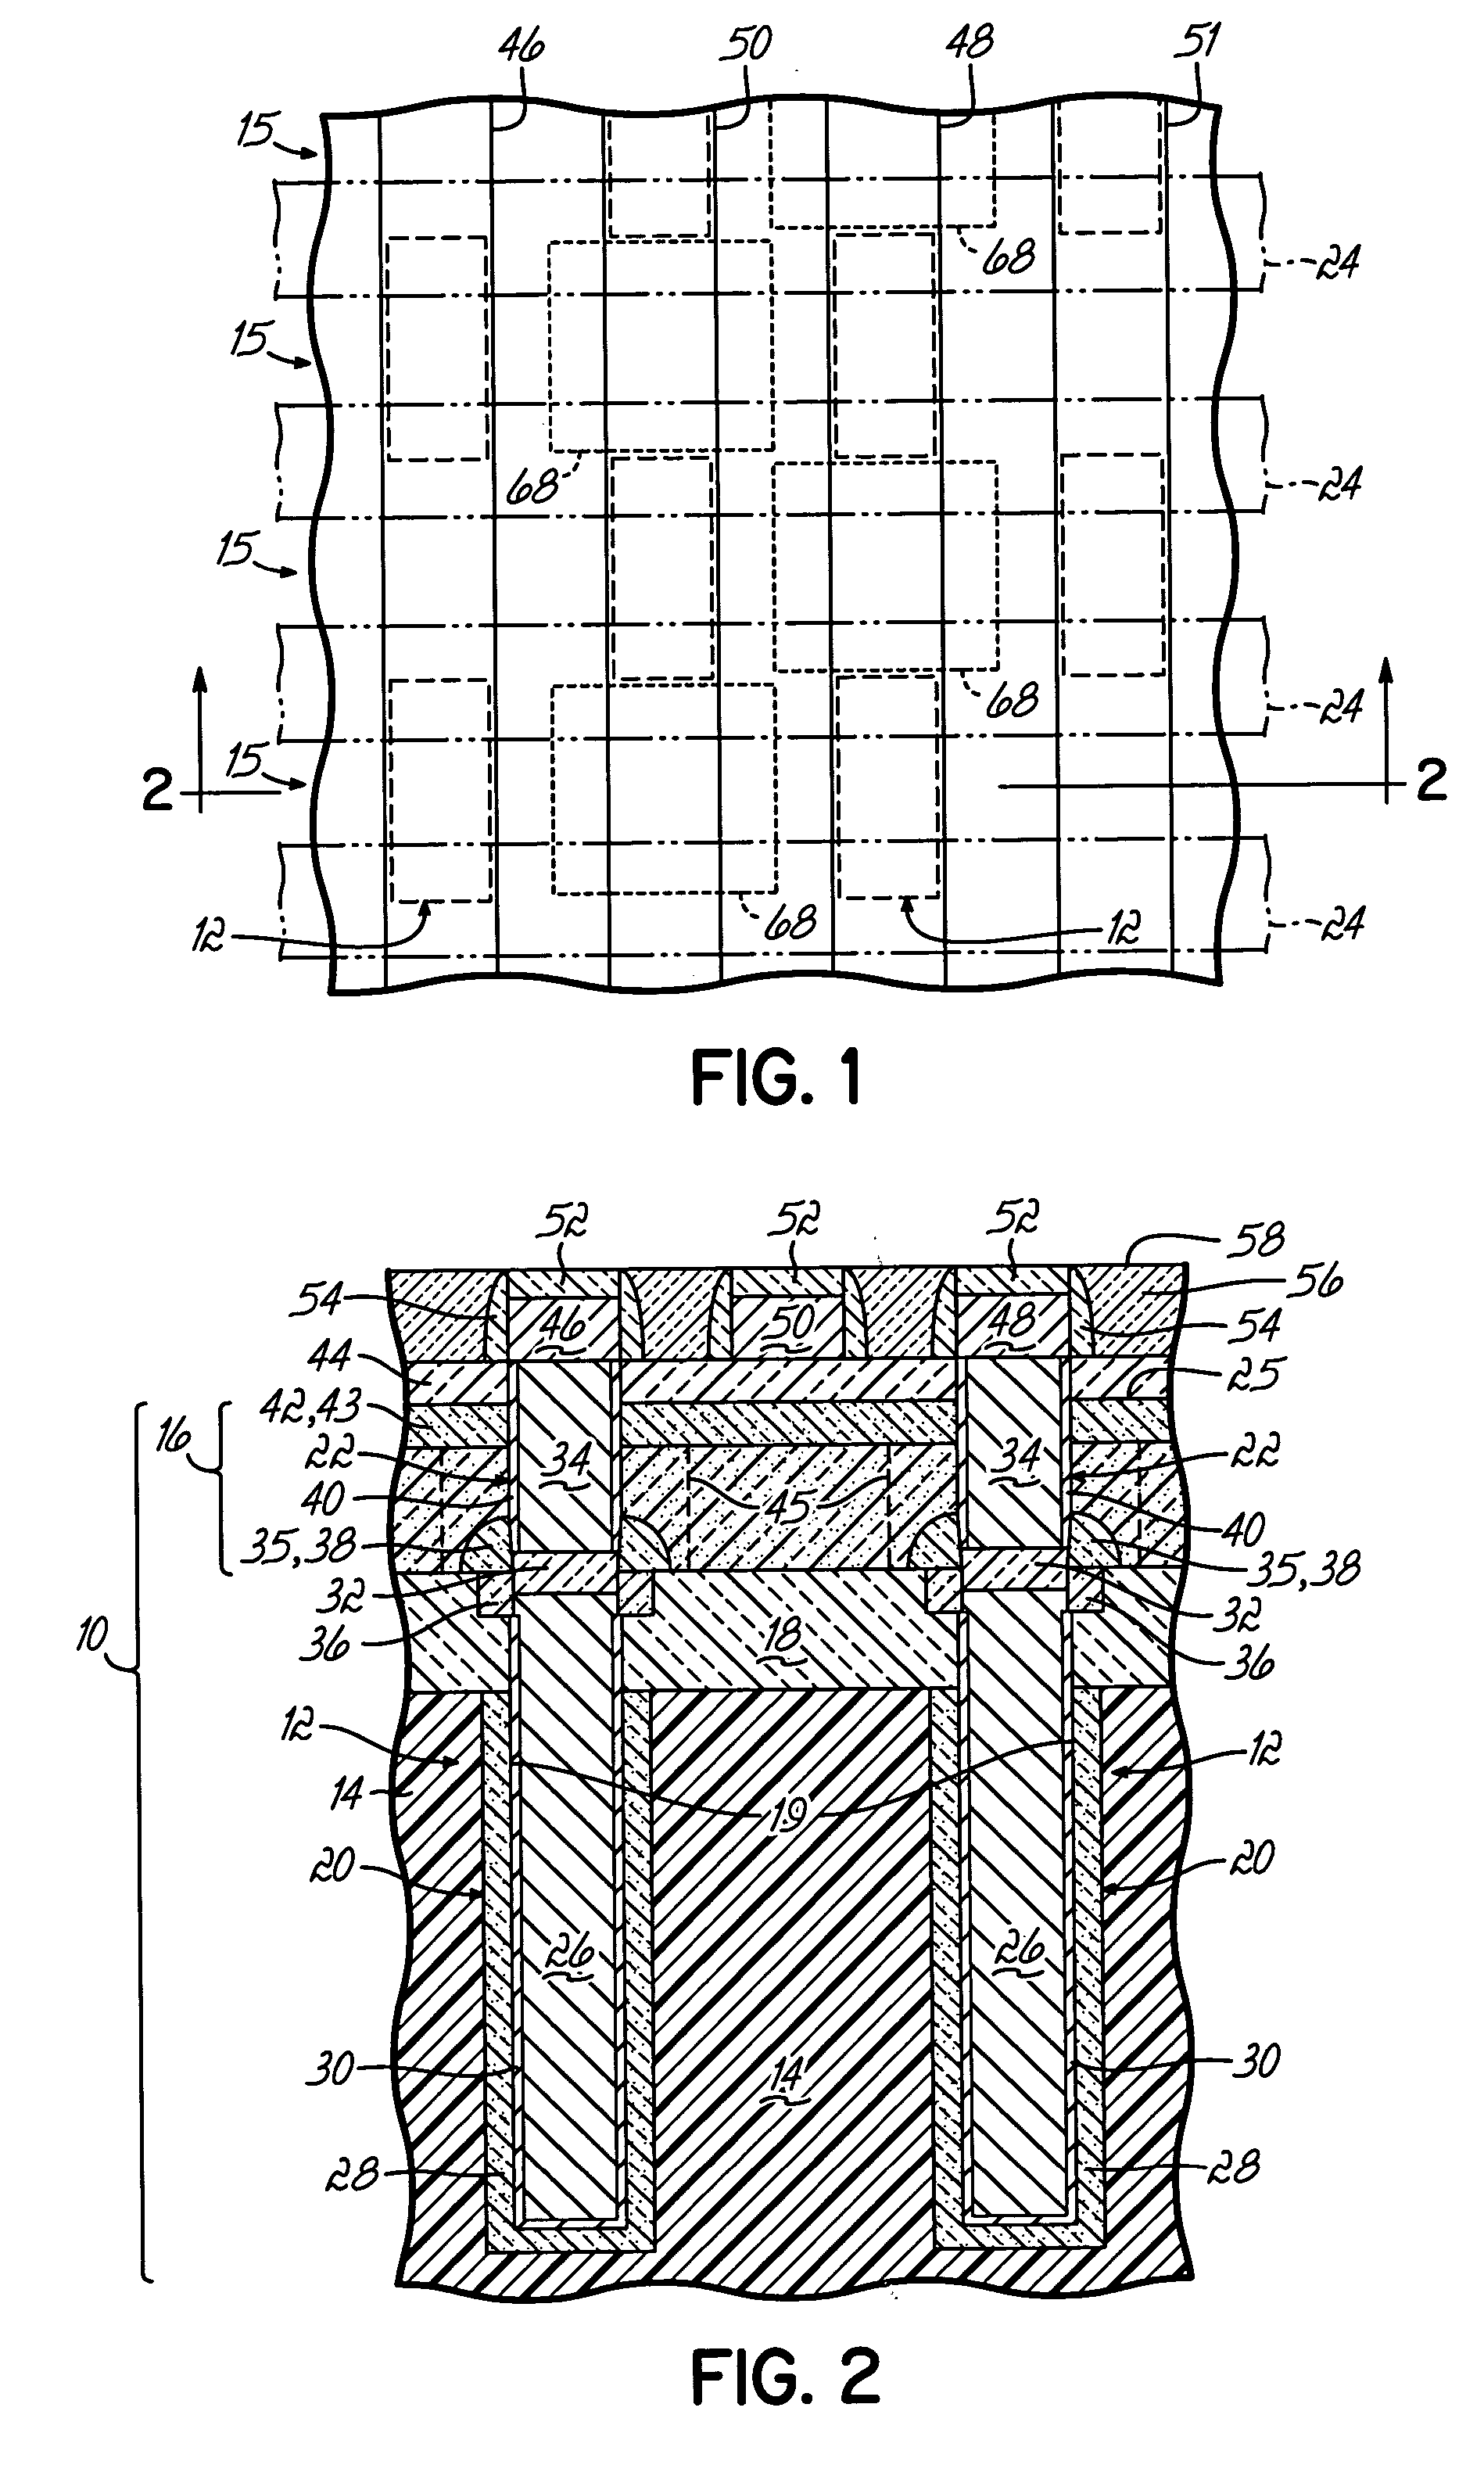 Body-contacted semiconductor structures and methods of fabricating such body-contacted semiconductor structures